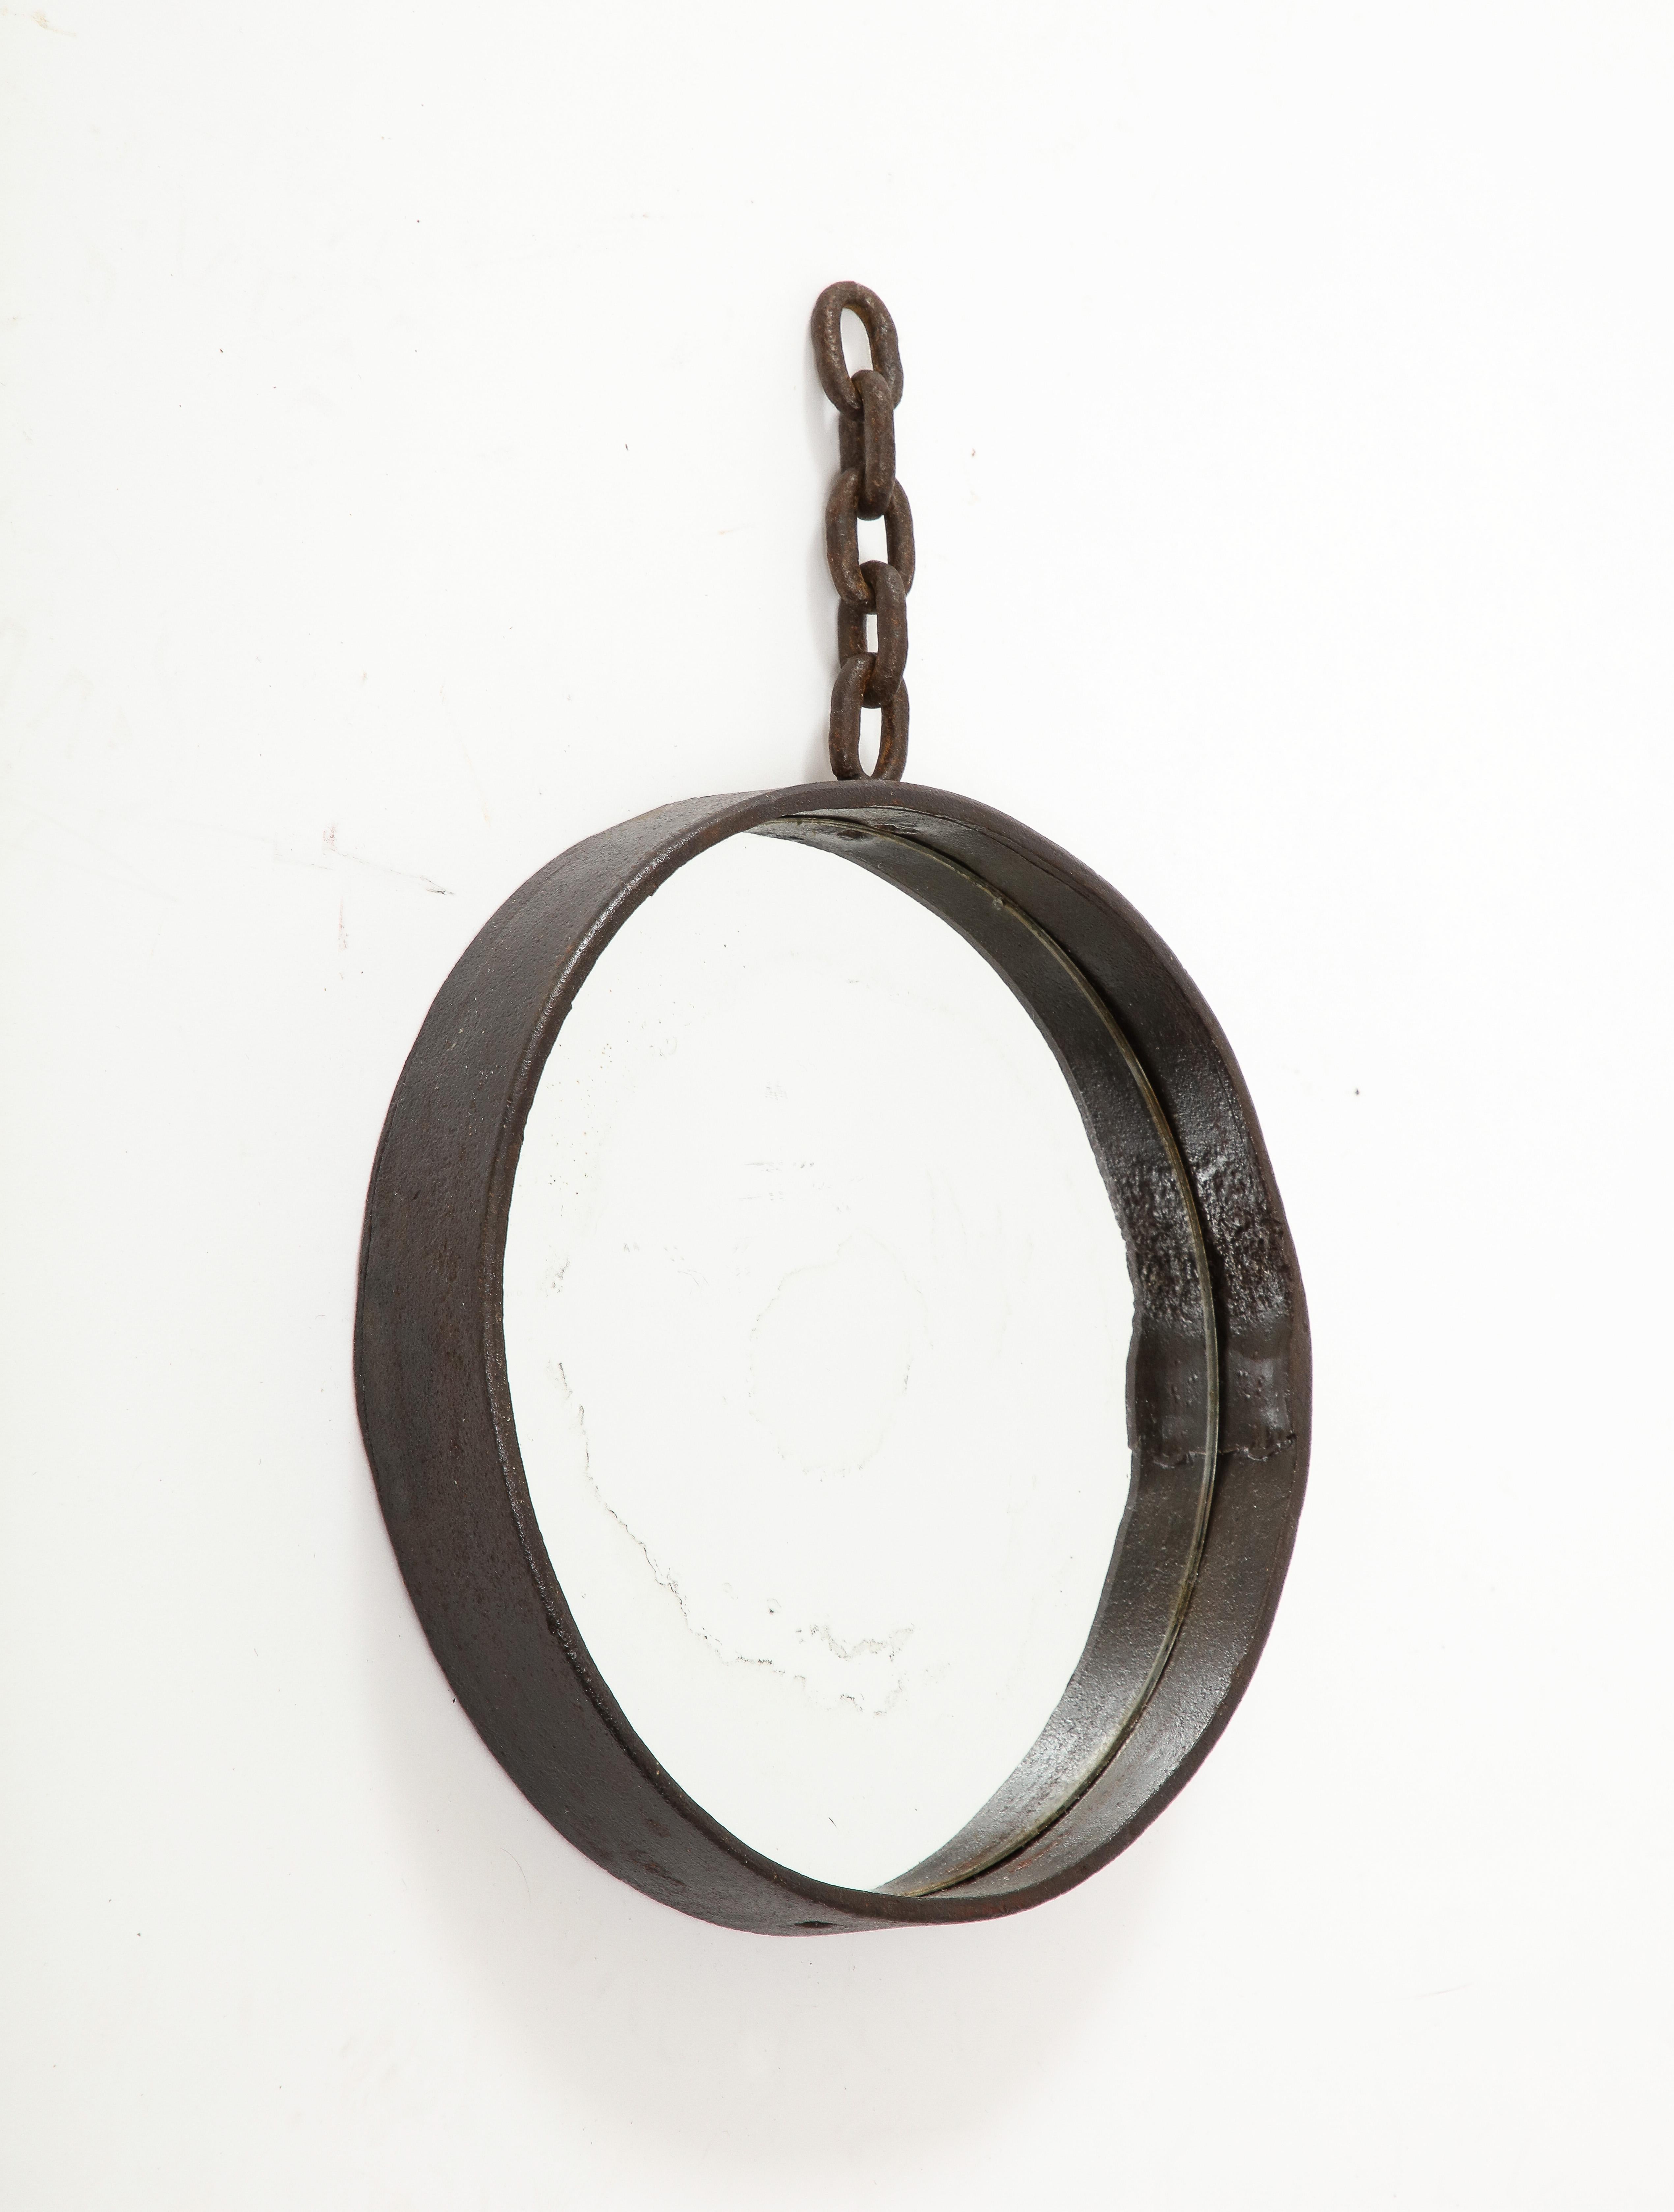 Handmade Iron Mirror with Old Glass and Hanging chain.
Mirror is actually 12.25 high without chain